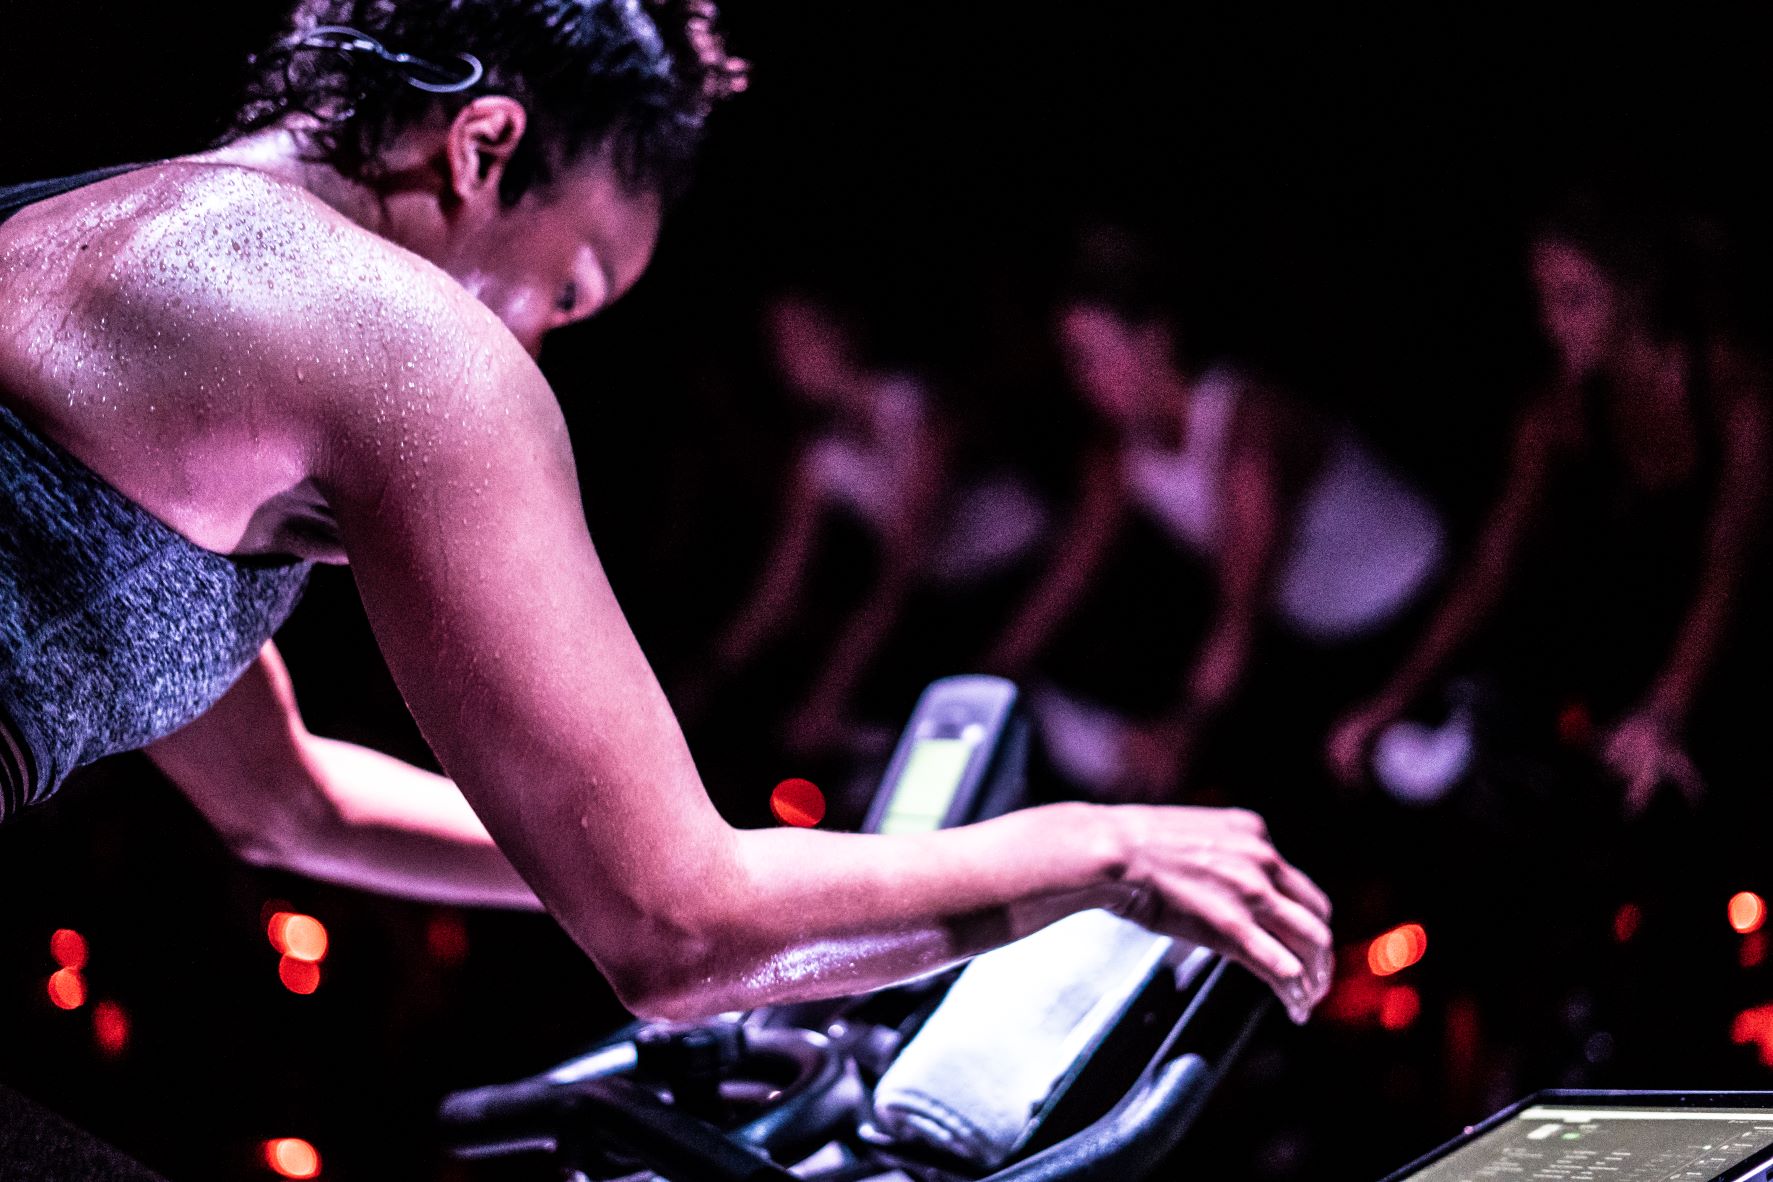 <p><span>“CYCLING INSTRUCTORS MUST BE DYNAMIC AND BE ABLE TO DELIVER NOT ONLY A GREAT WORKOUT BUT AN EXPERIENCE FOR THE RIDER,” SAys TEVIA CELLI, THE VICE PRESIDENT OF EXPERIENCE AT CYCLEBAR.</span></p>